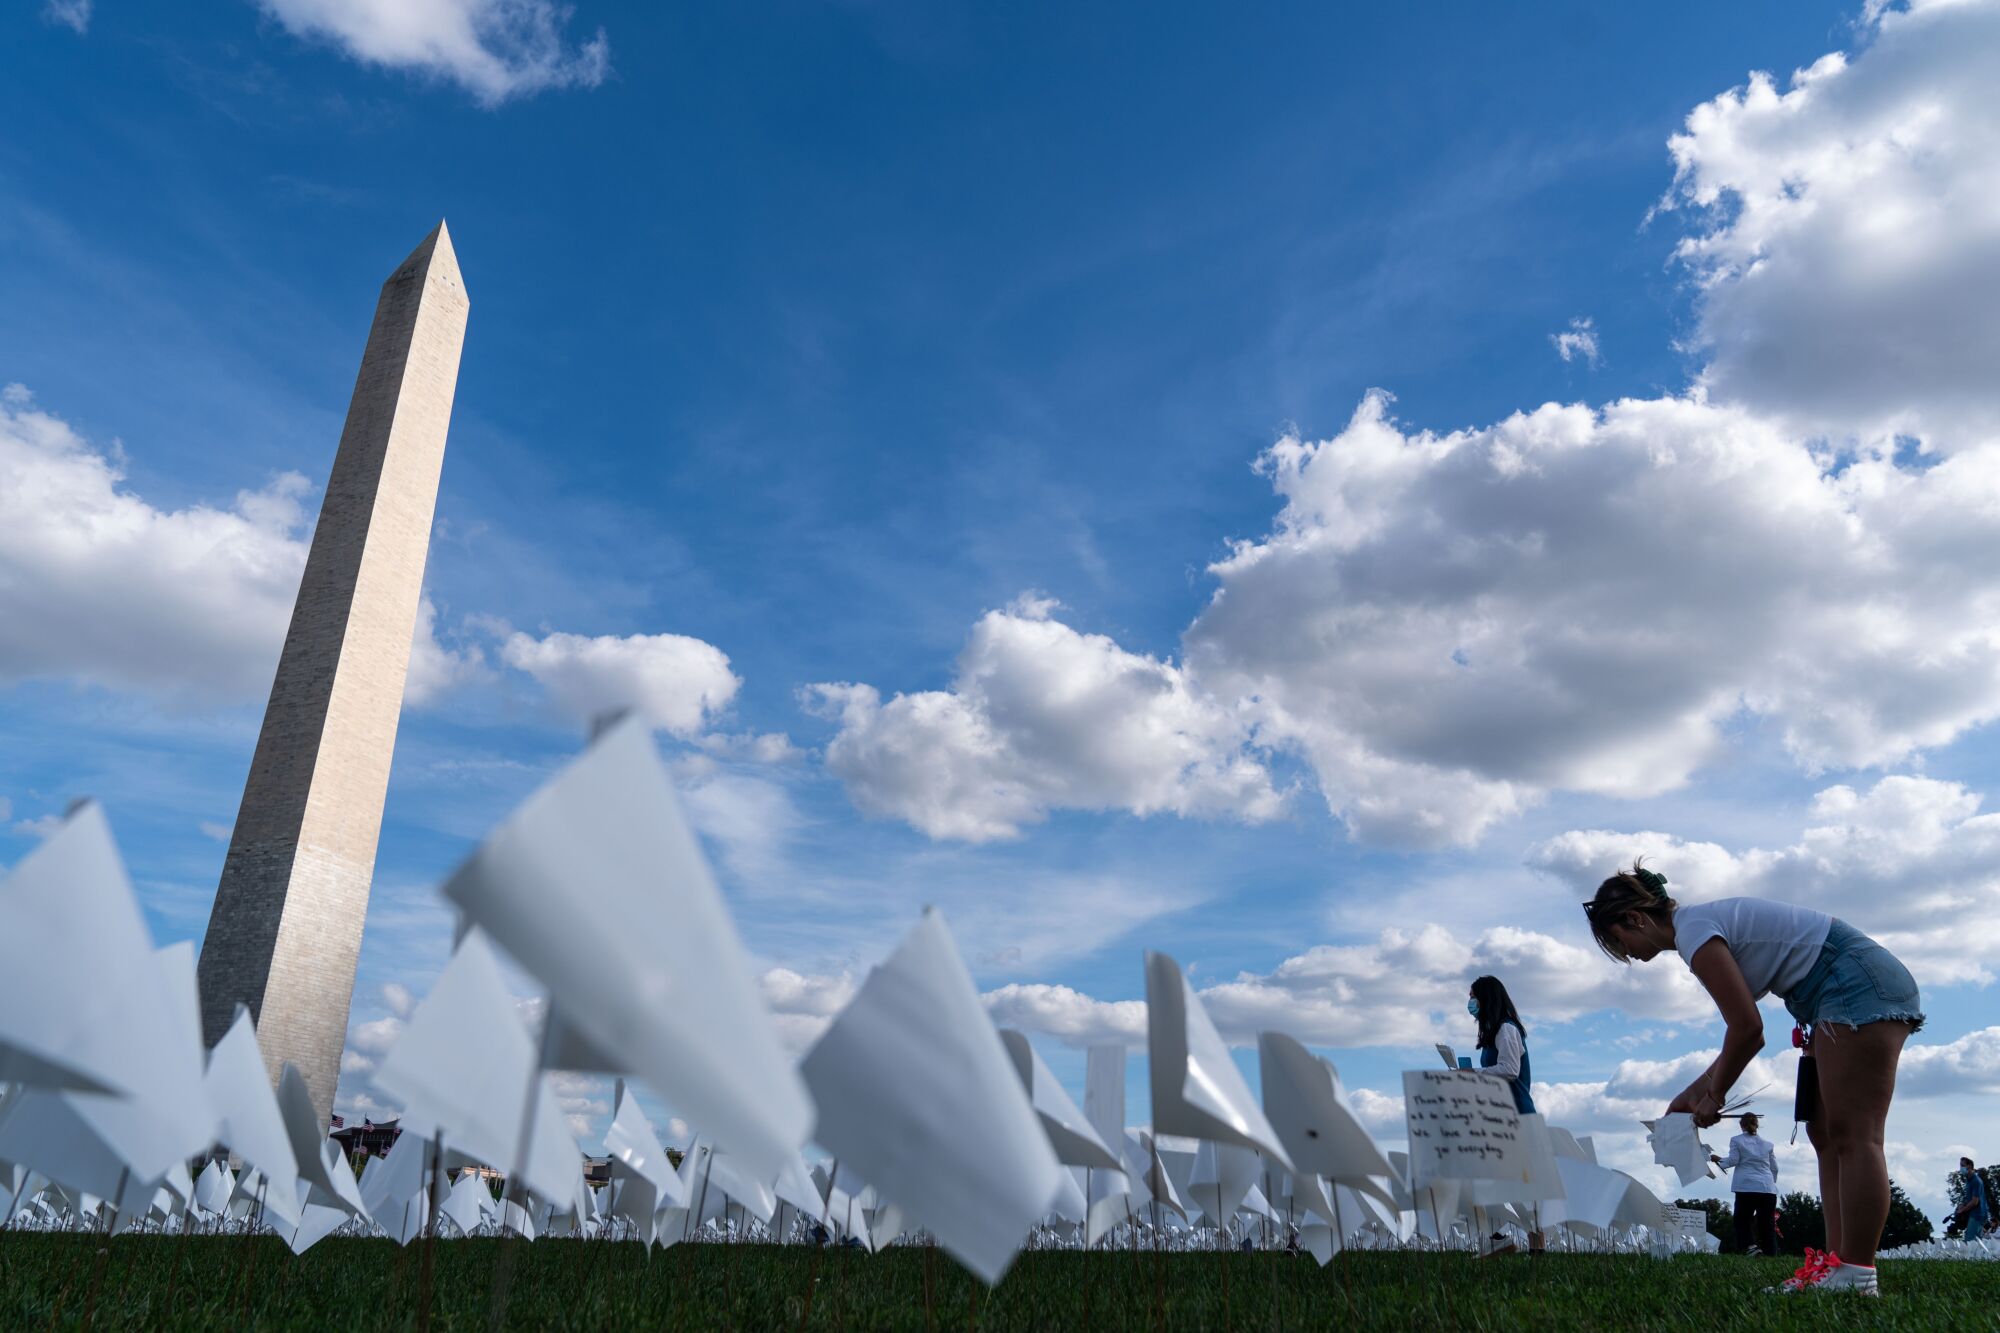 A woman bends over to place a small white flag in the grass, near the Washington Monument